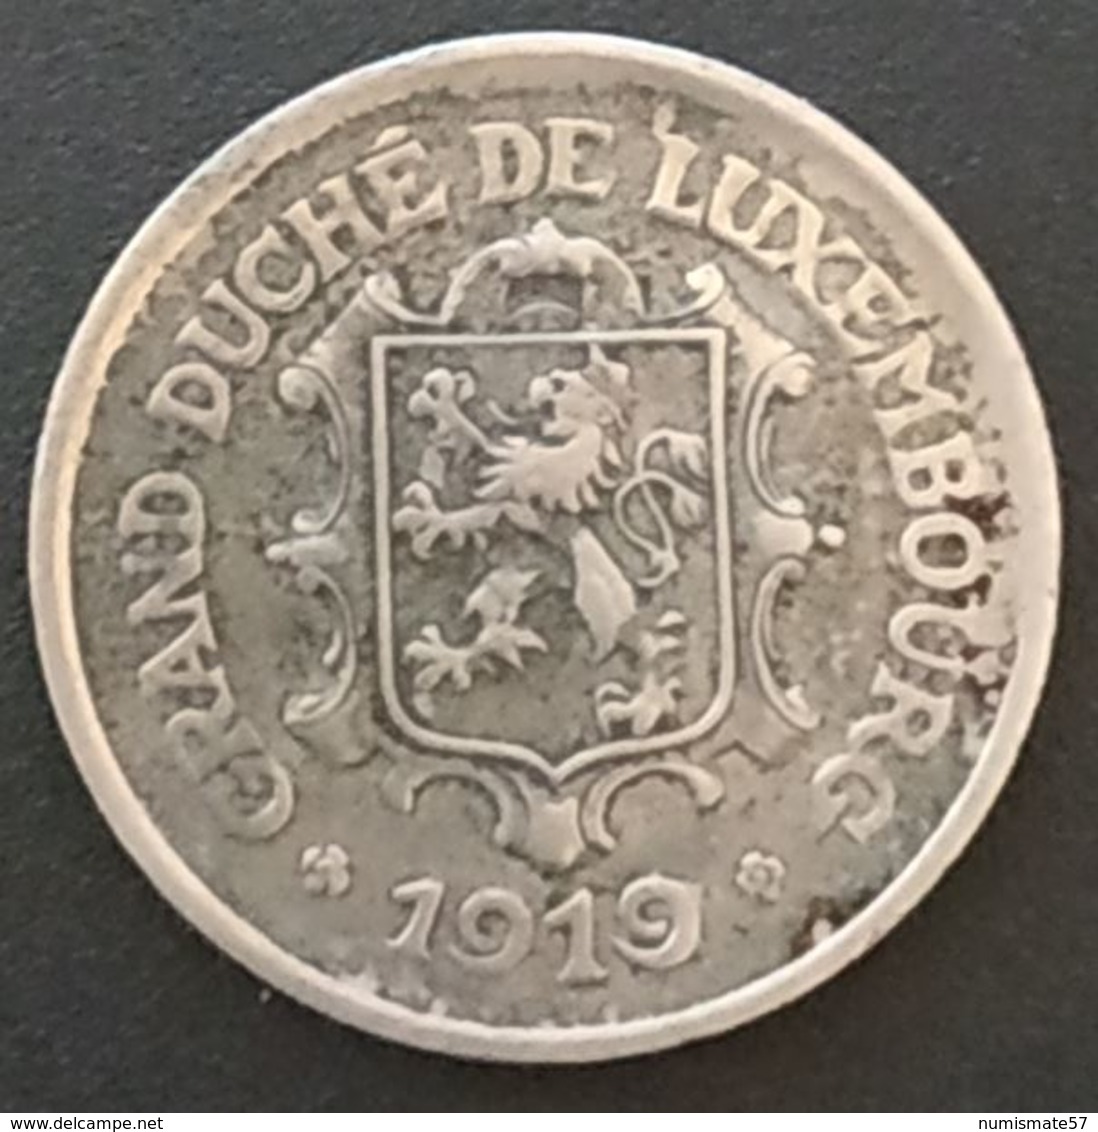 LUXEMBOURG - 25 CENTIMES 1919 - Fer - KM 32 - Luxemburg